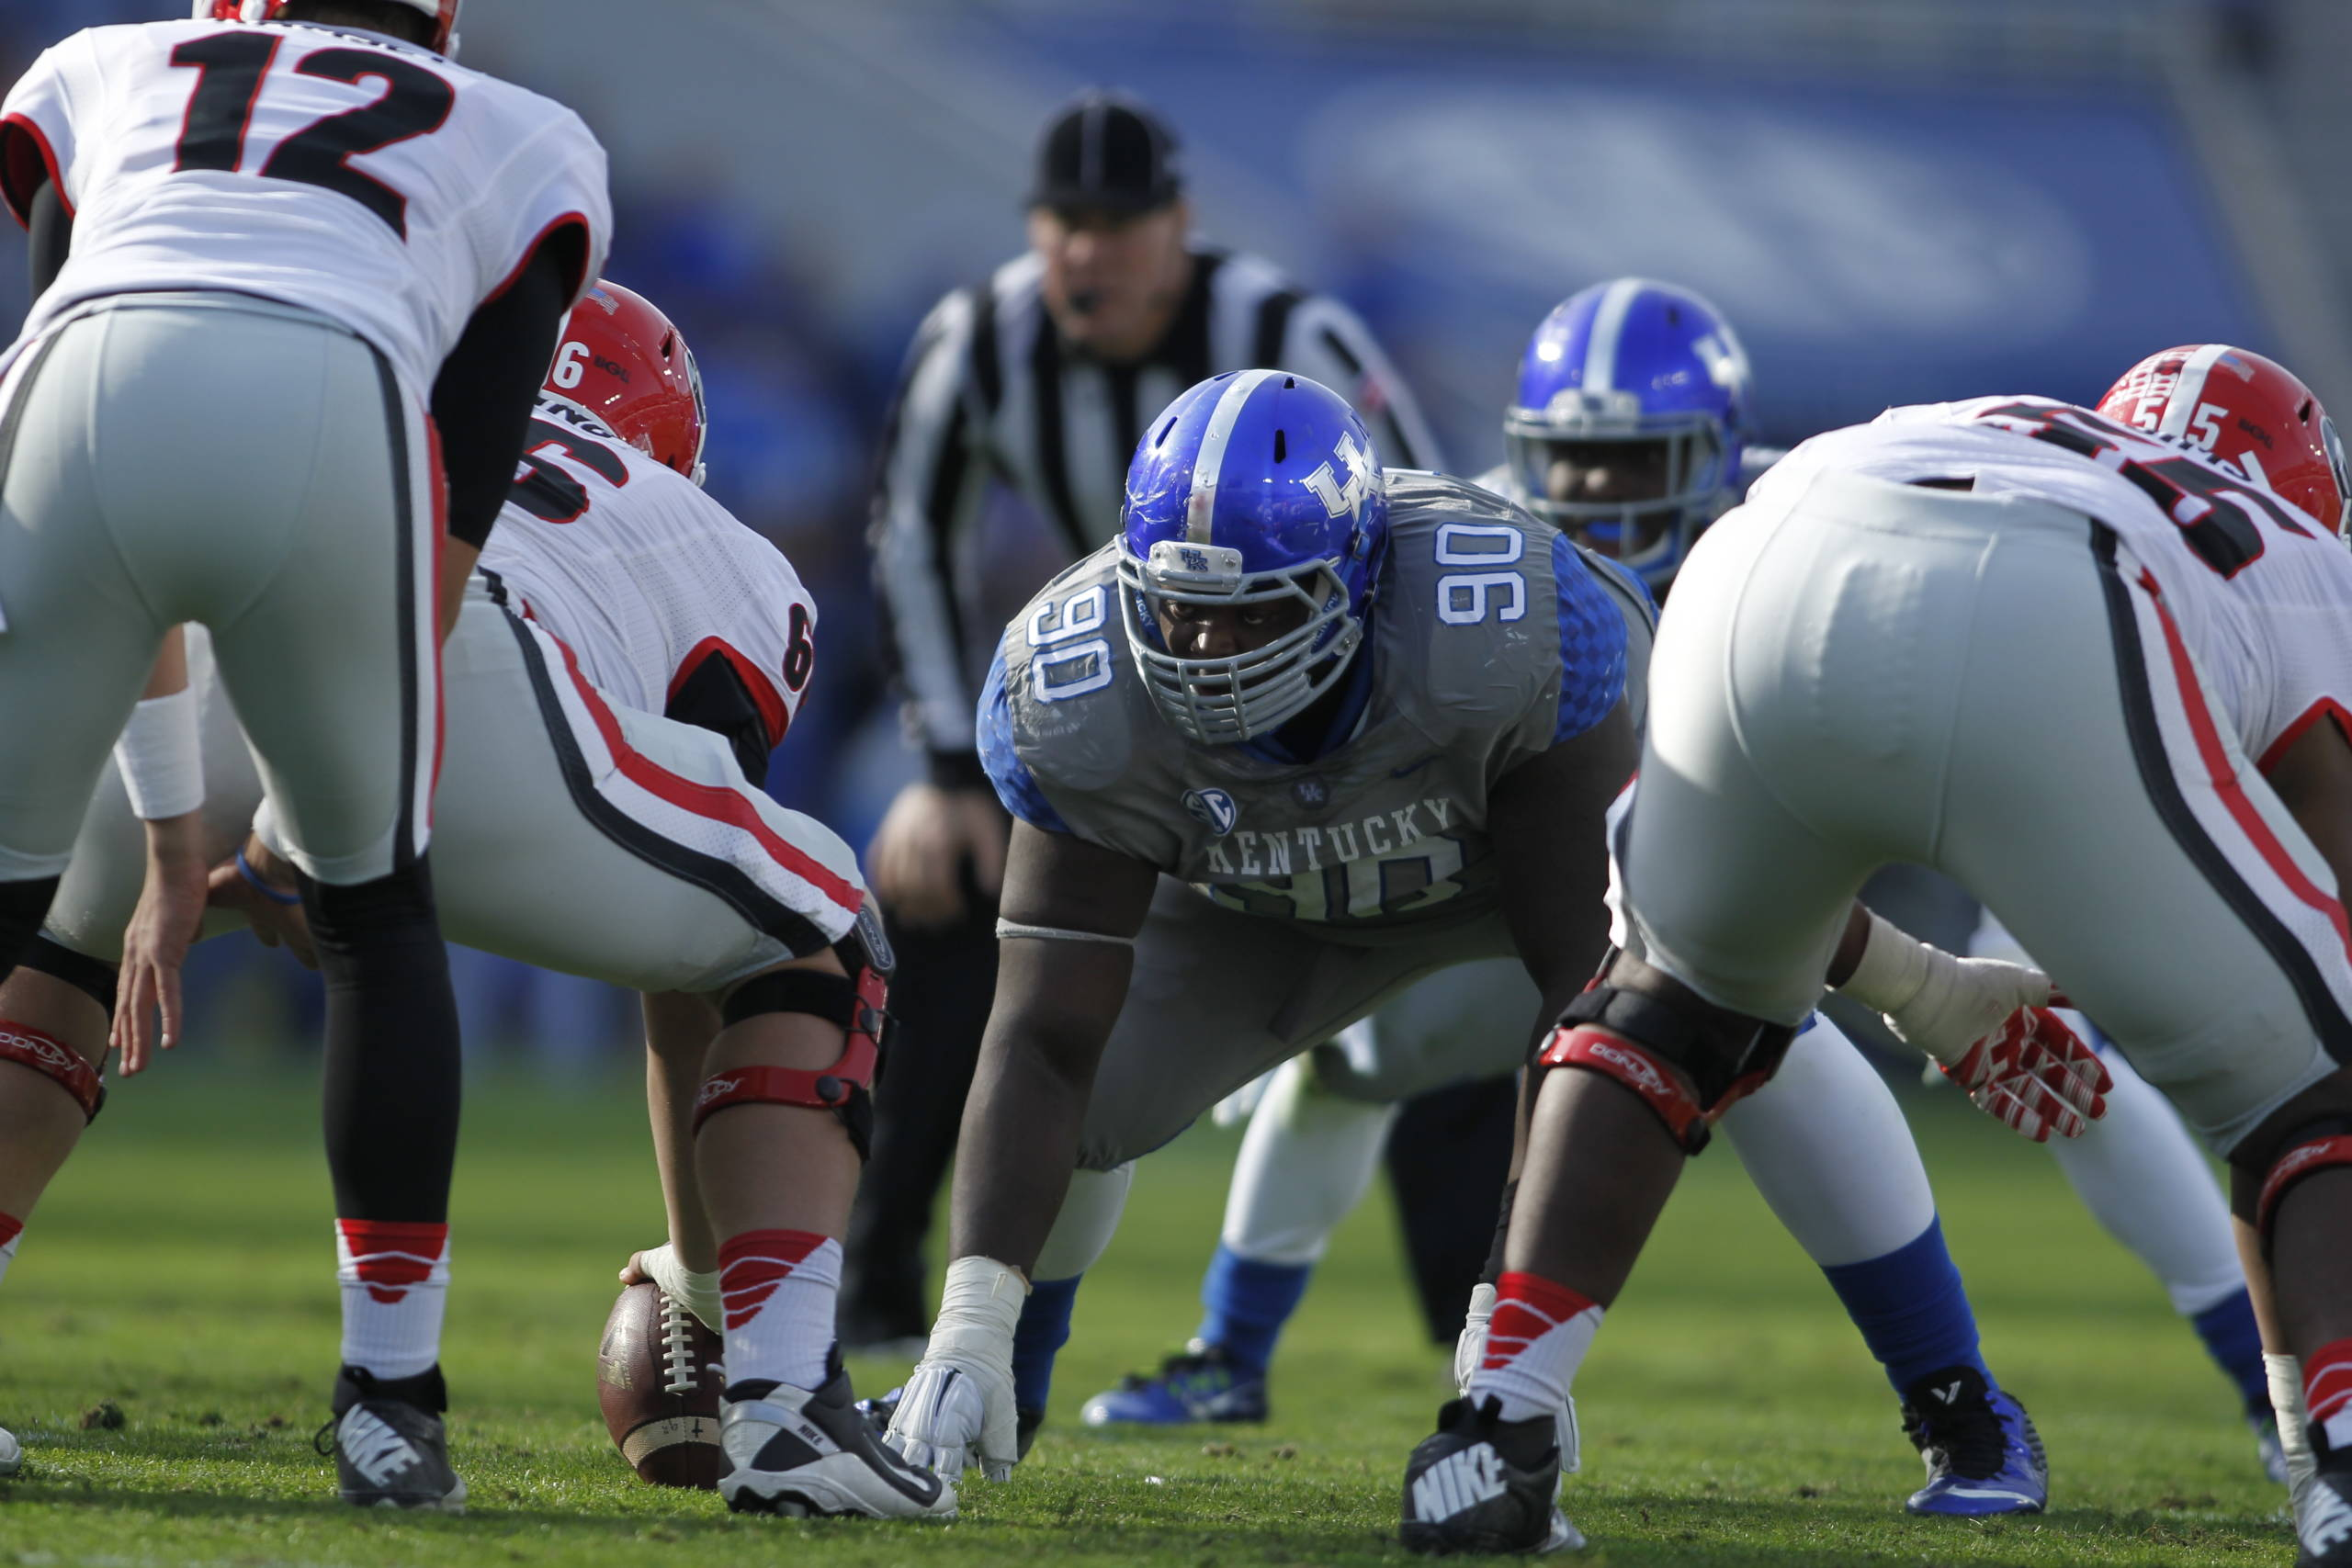 Defensive line developing attitude in trenches